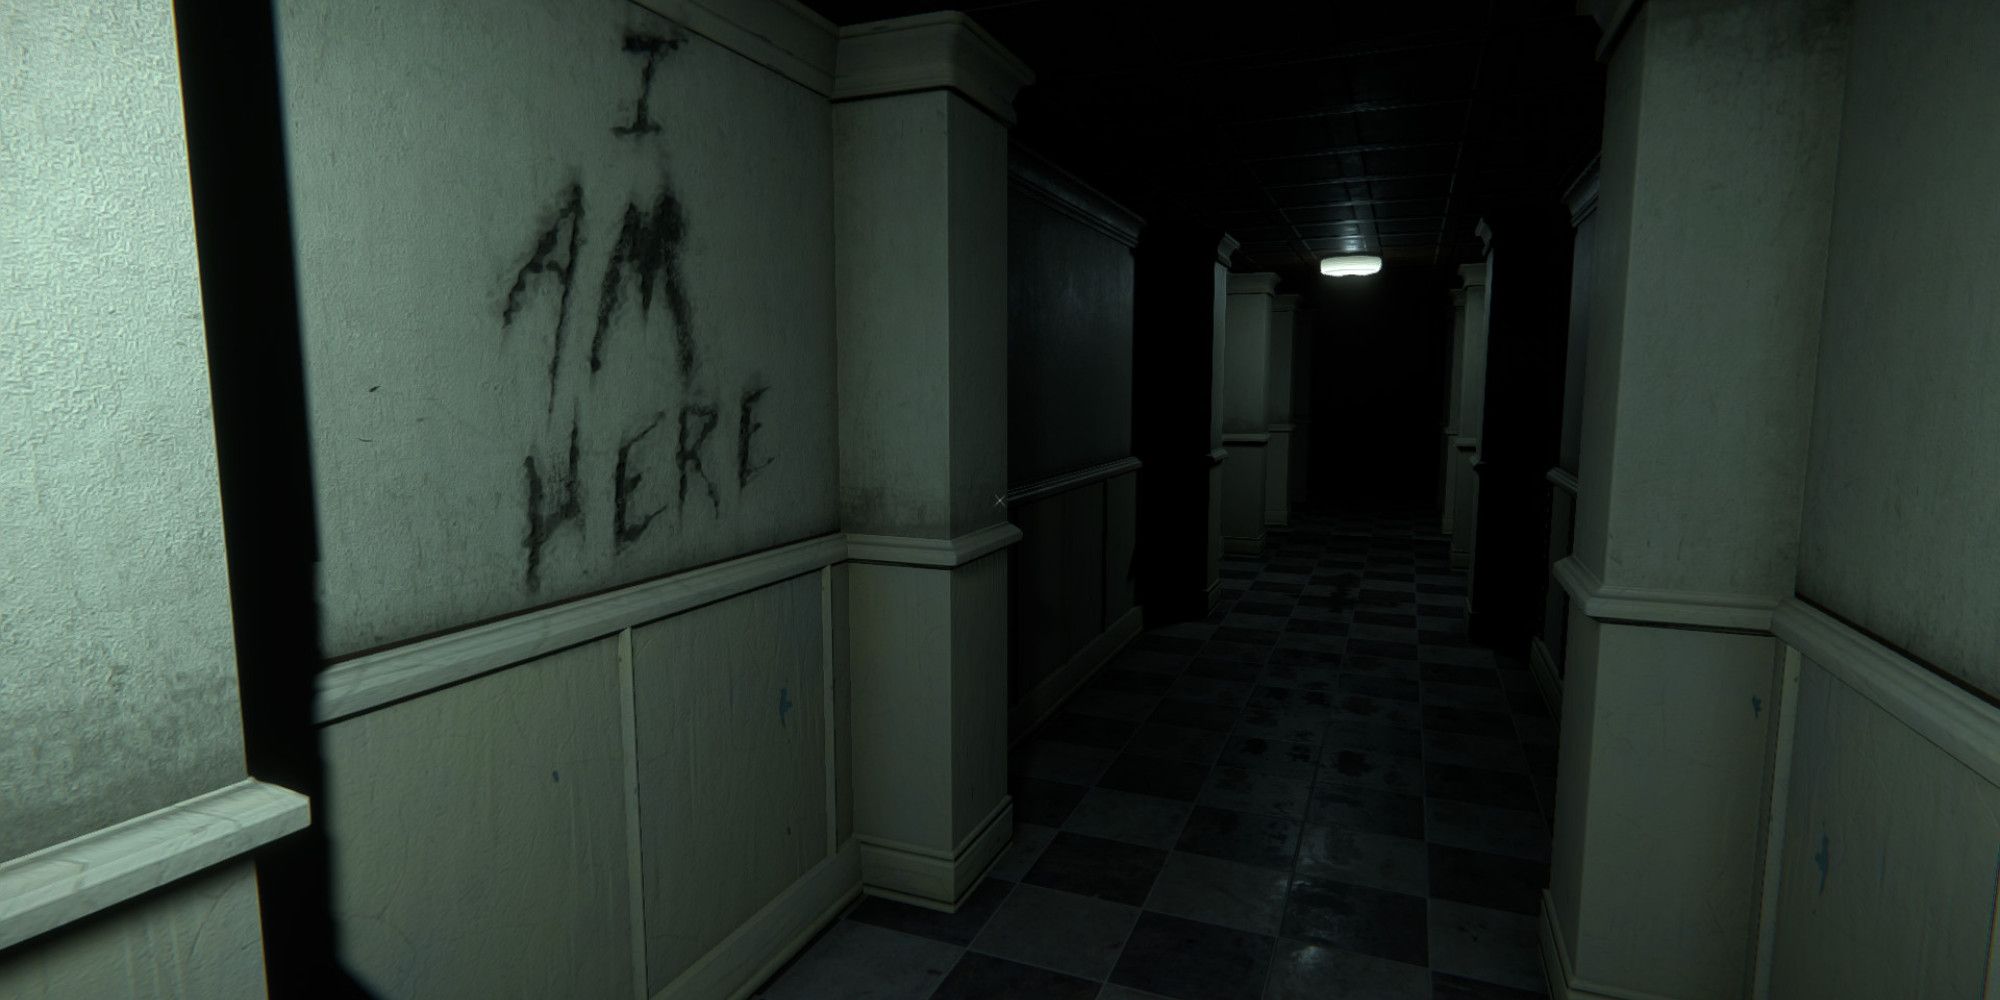 The Mortuary Assistant - Hallway with message scrawled in blood